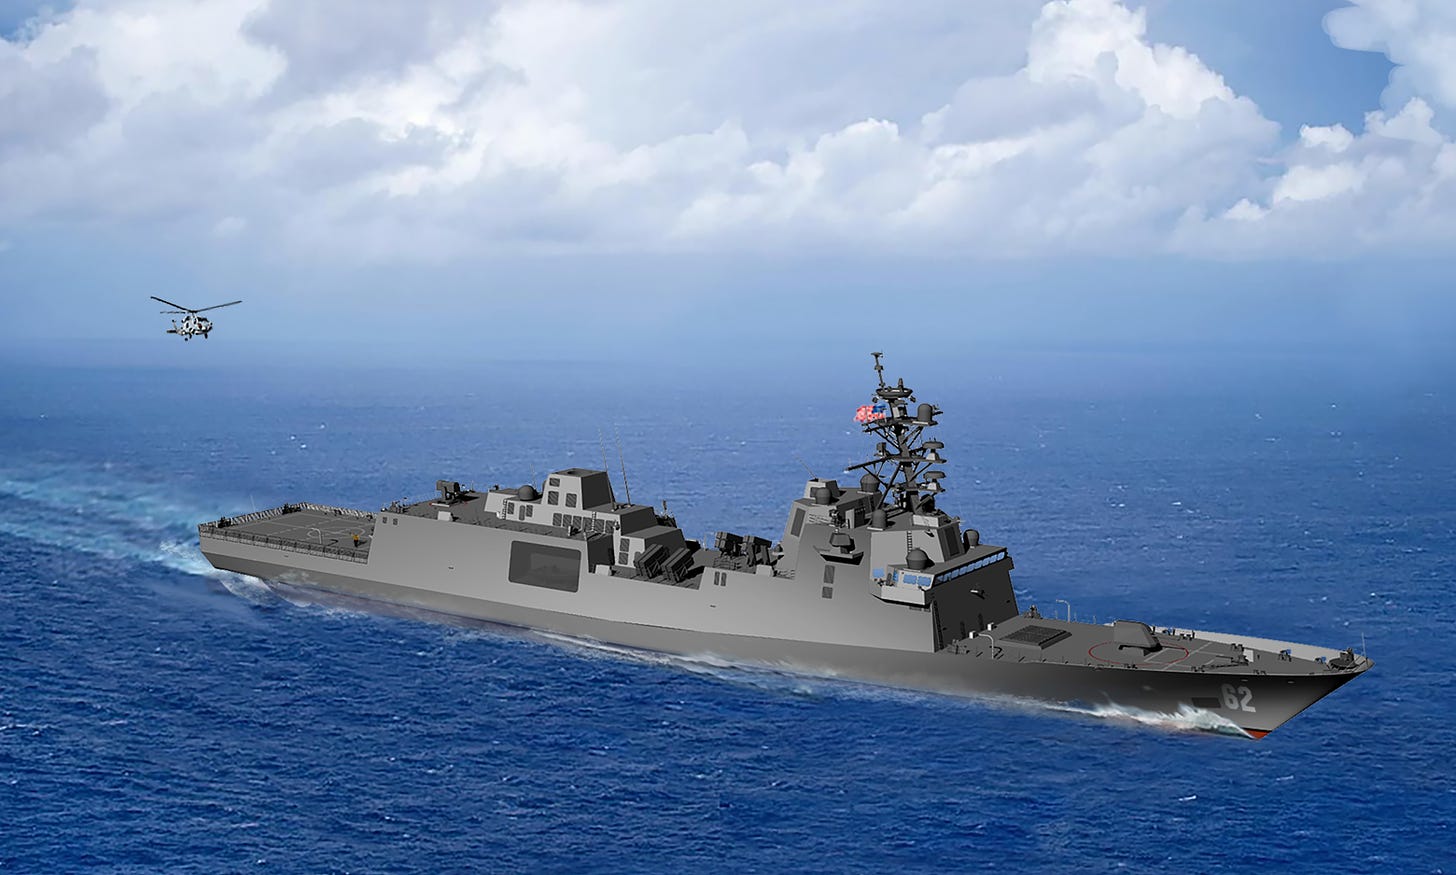 Here's the latest on the US Navy's new Constellation-class frigate